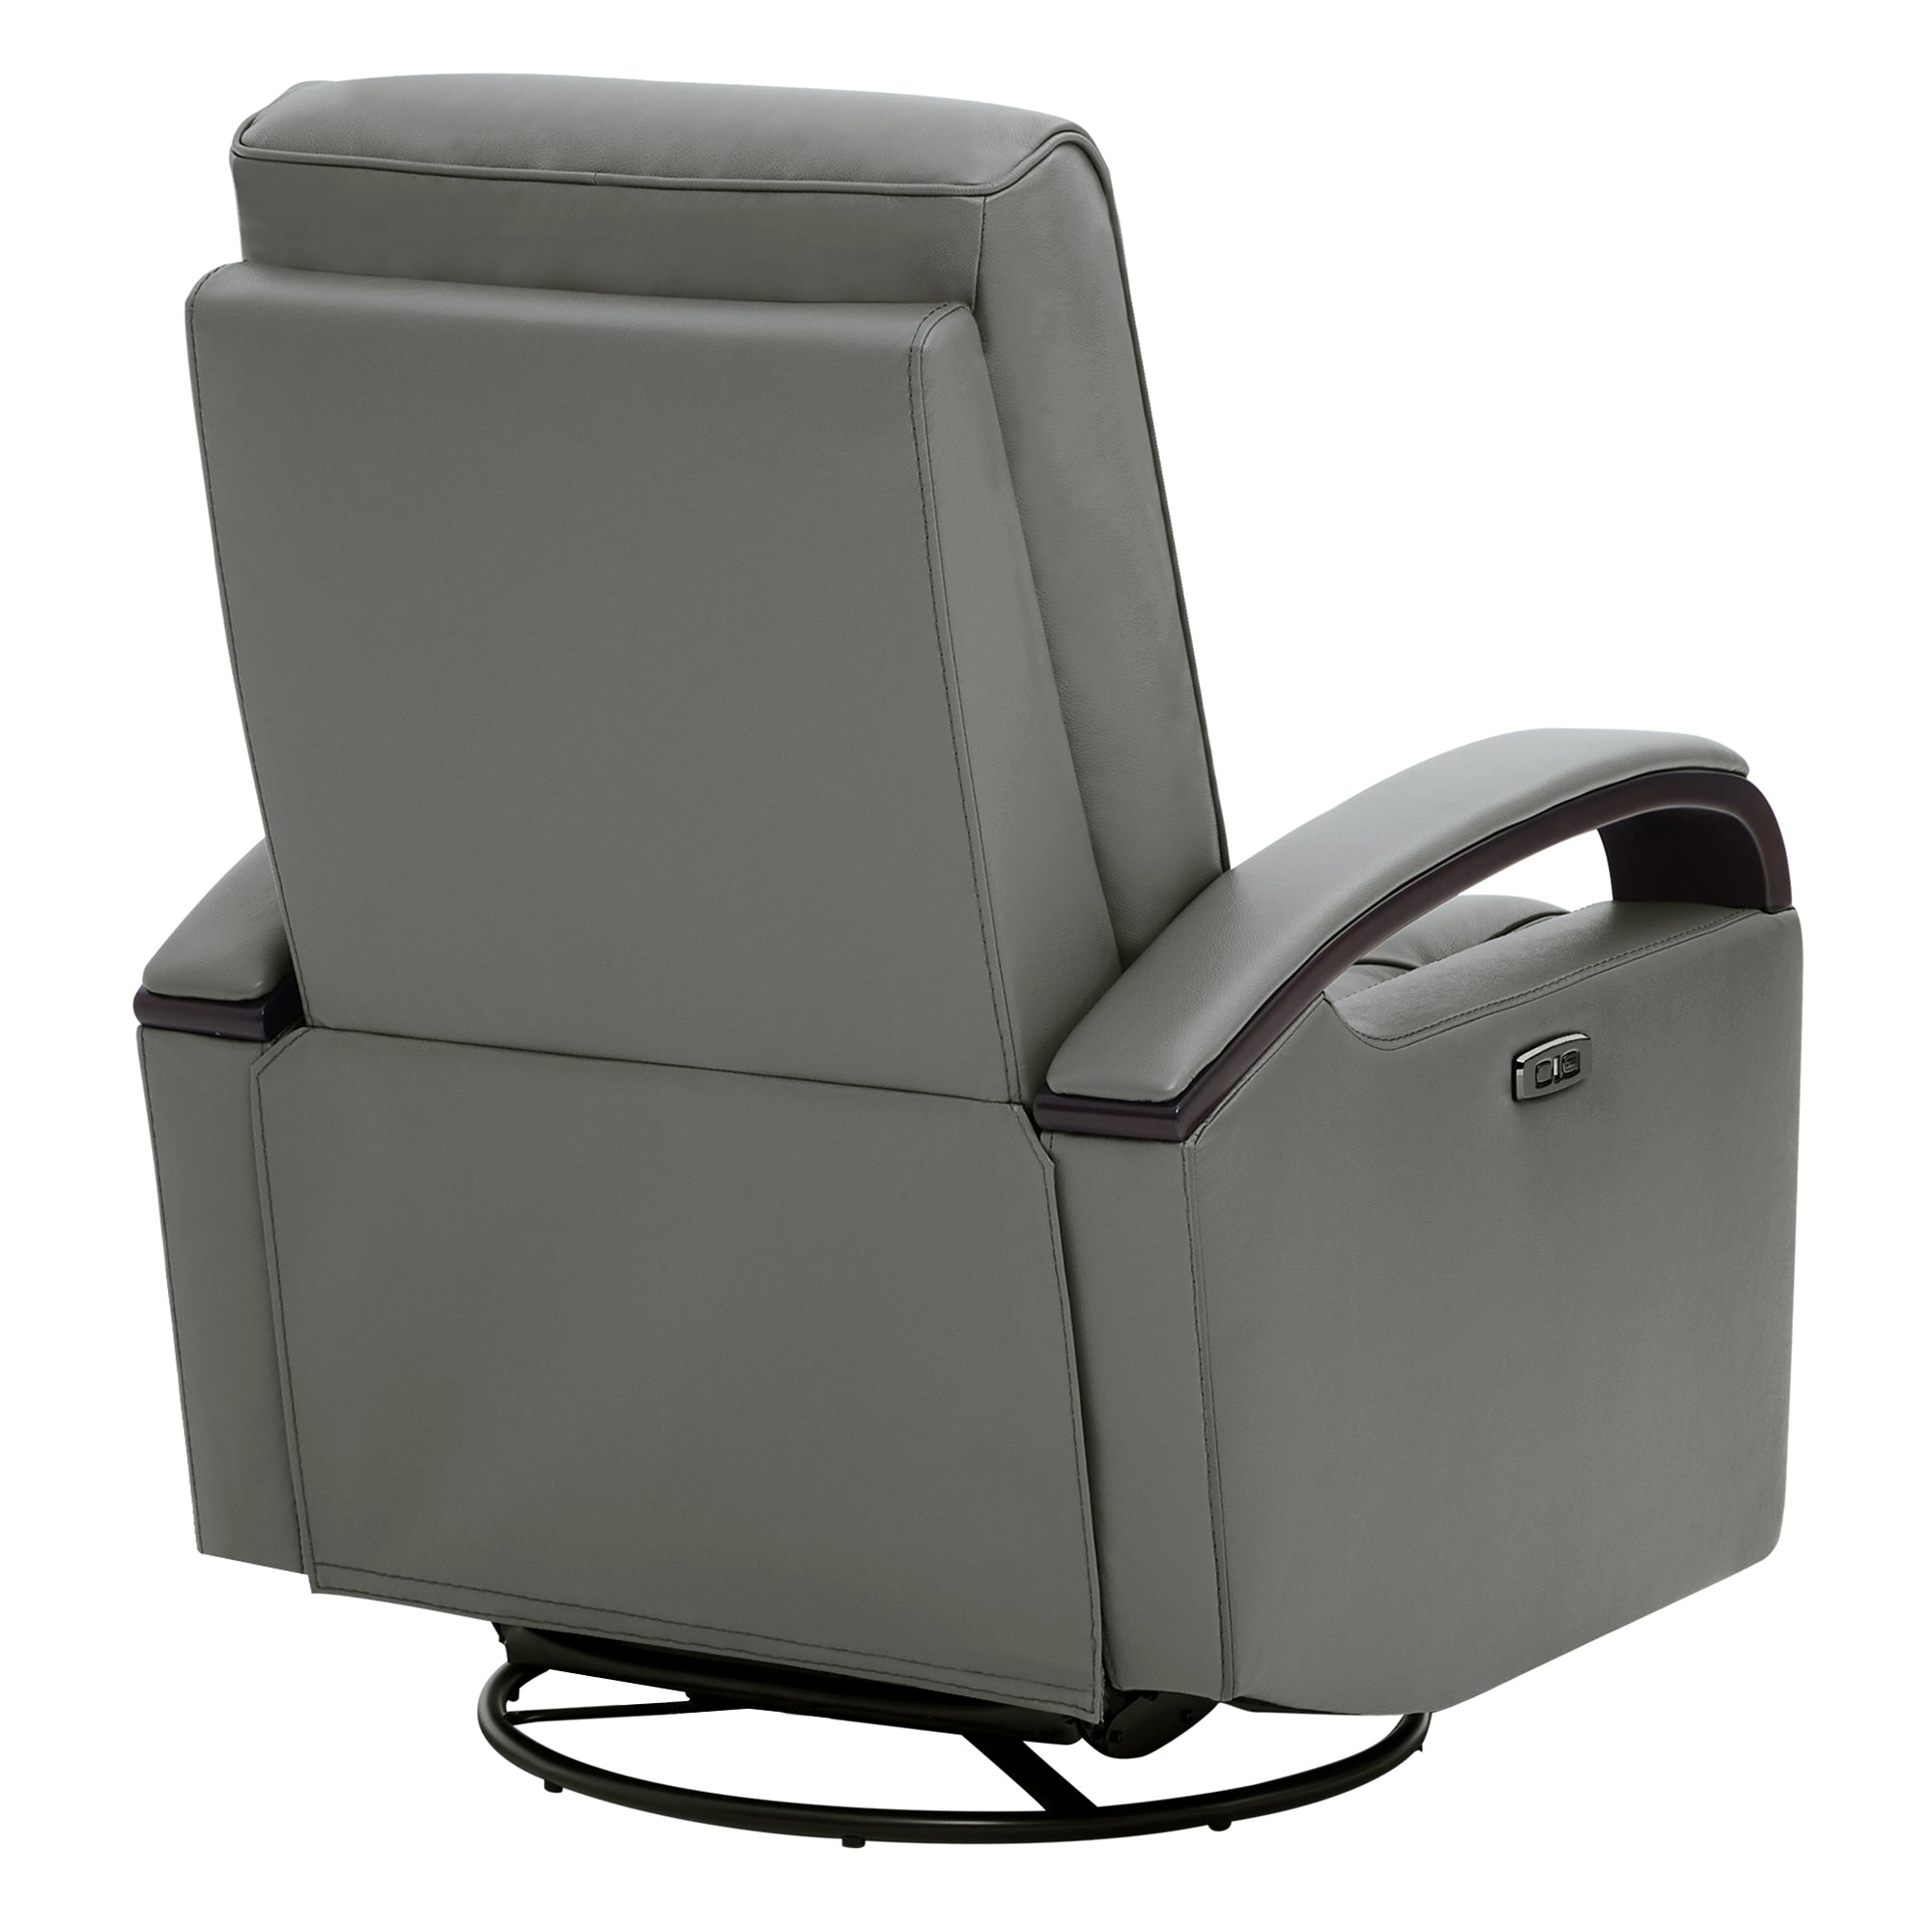 CHITA LIVING-Gentry Leather Power Swivel Glider Recliner with USB Charge-Recliners-Genuine Leather-Haze-